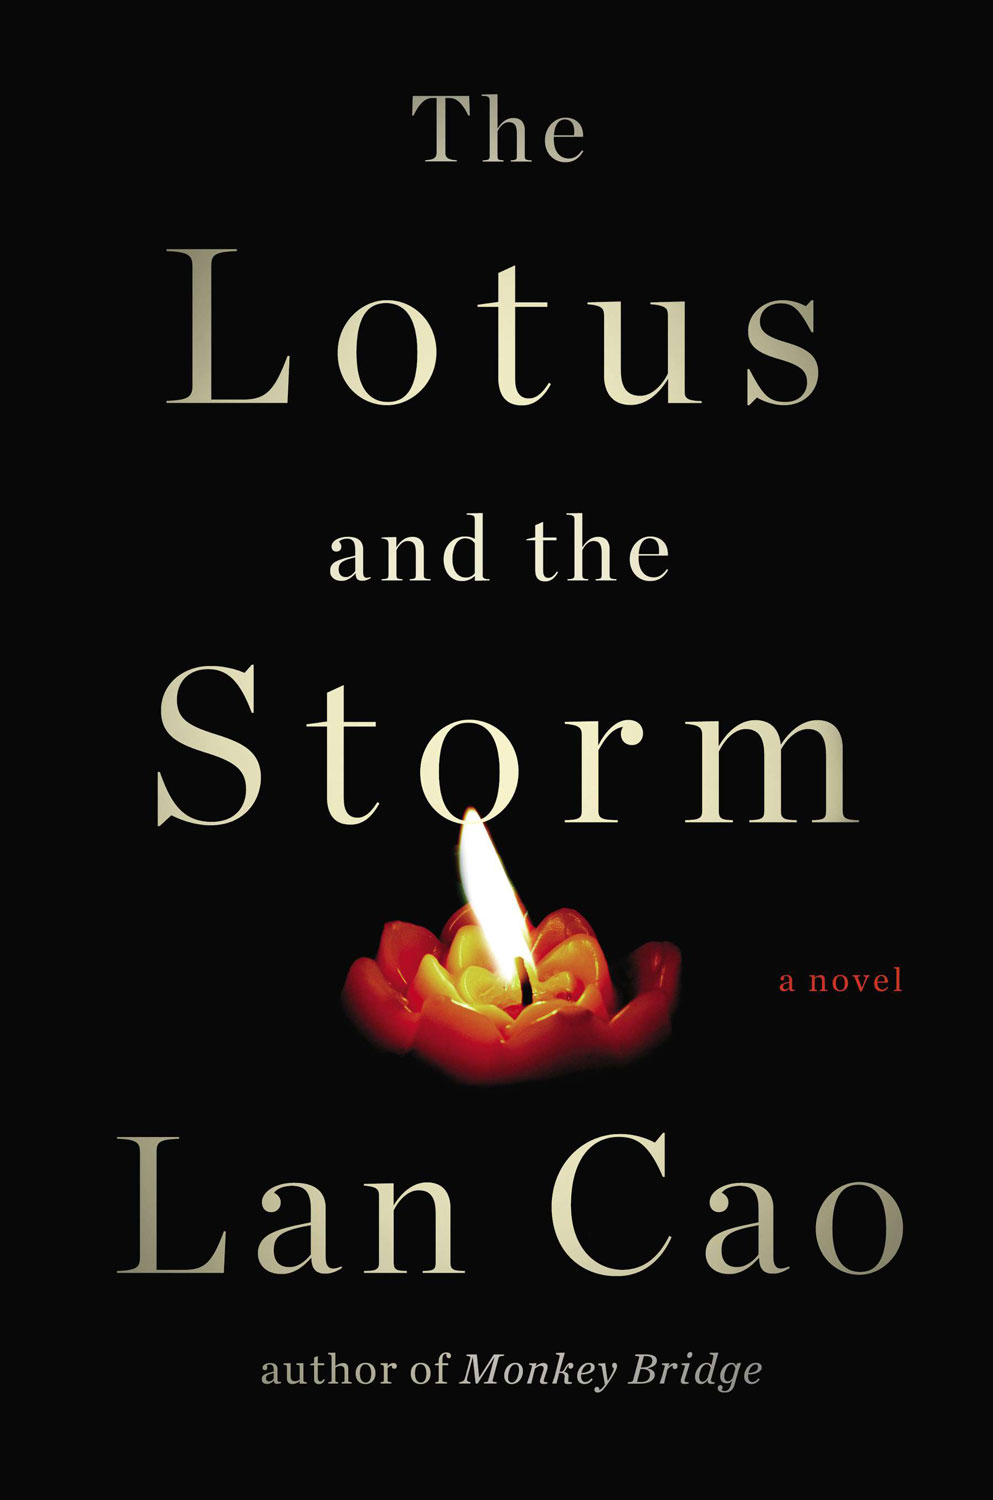 Lan Cao, The Lotus and the Storm (2014)